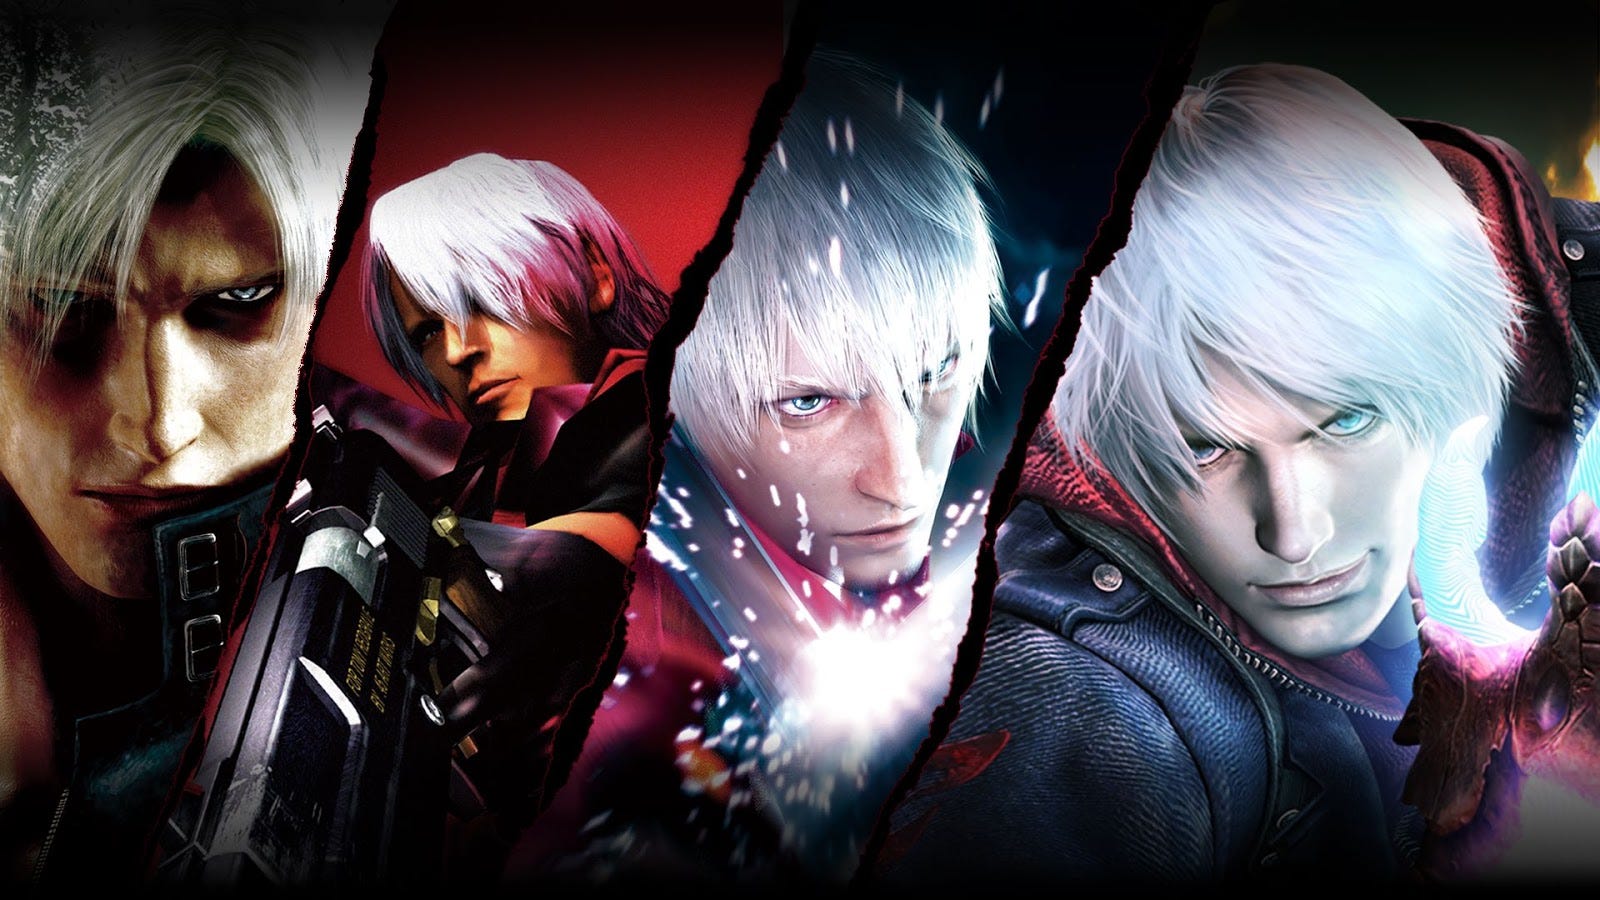 The original Devil May Cry is coming to Switch, so a DMC 5 port isn't out  of the question